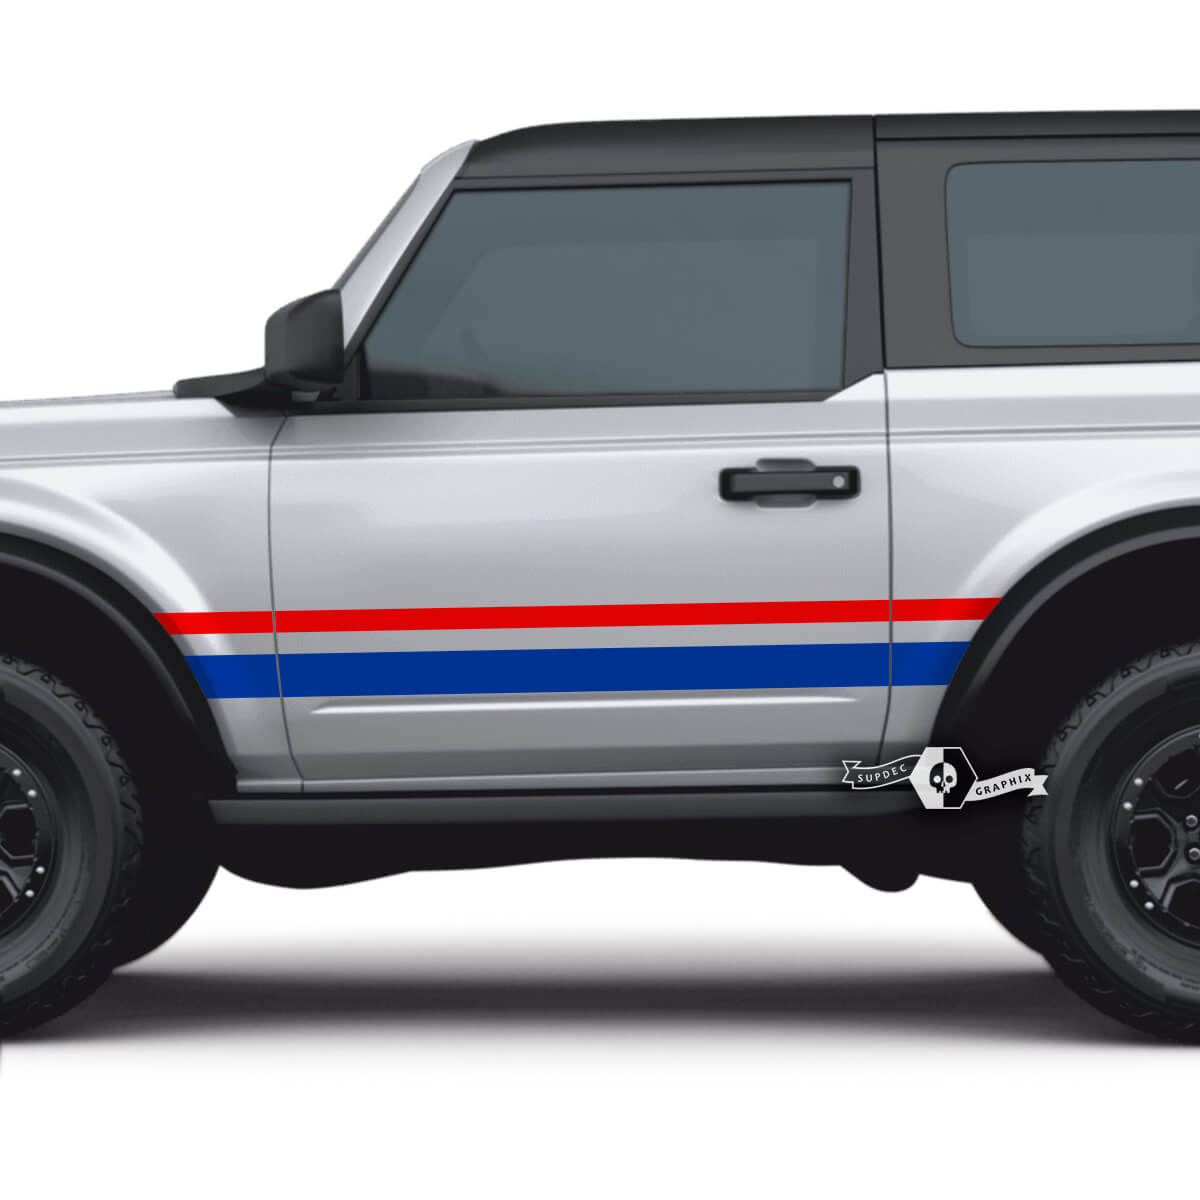 2x Set of 2 Doors Ford Bronco Side Decals Stripes Stickers for Ford Bronco 2 Colors
